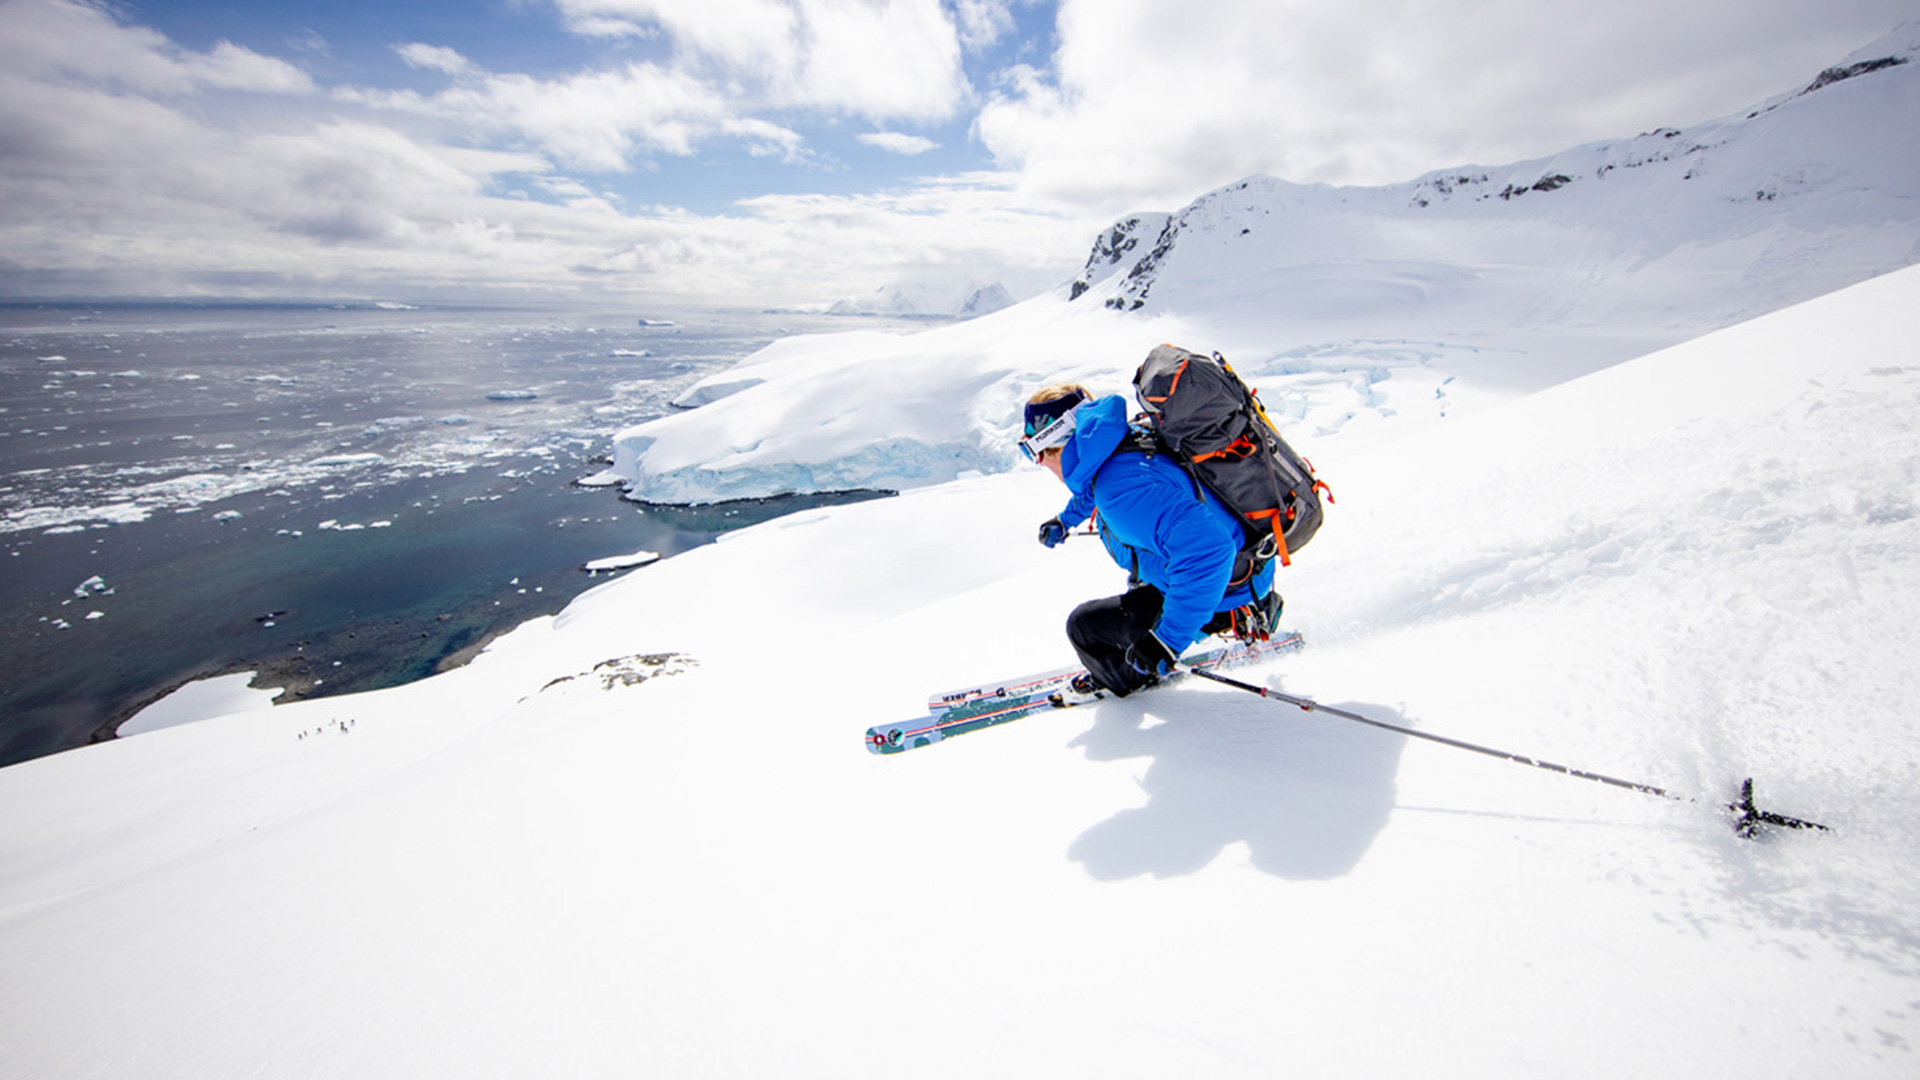 EYOS announces ultimate skiing expeditions in Antarctica and Greenland with Bomber Ski, Olympic Medalist Bode Miller, and Doug Stoup